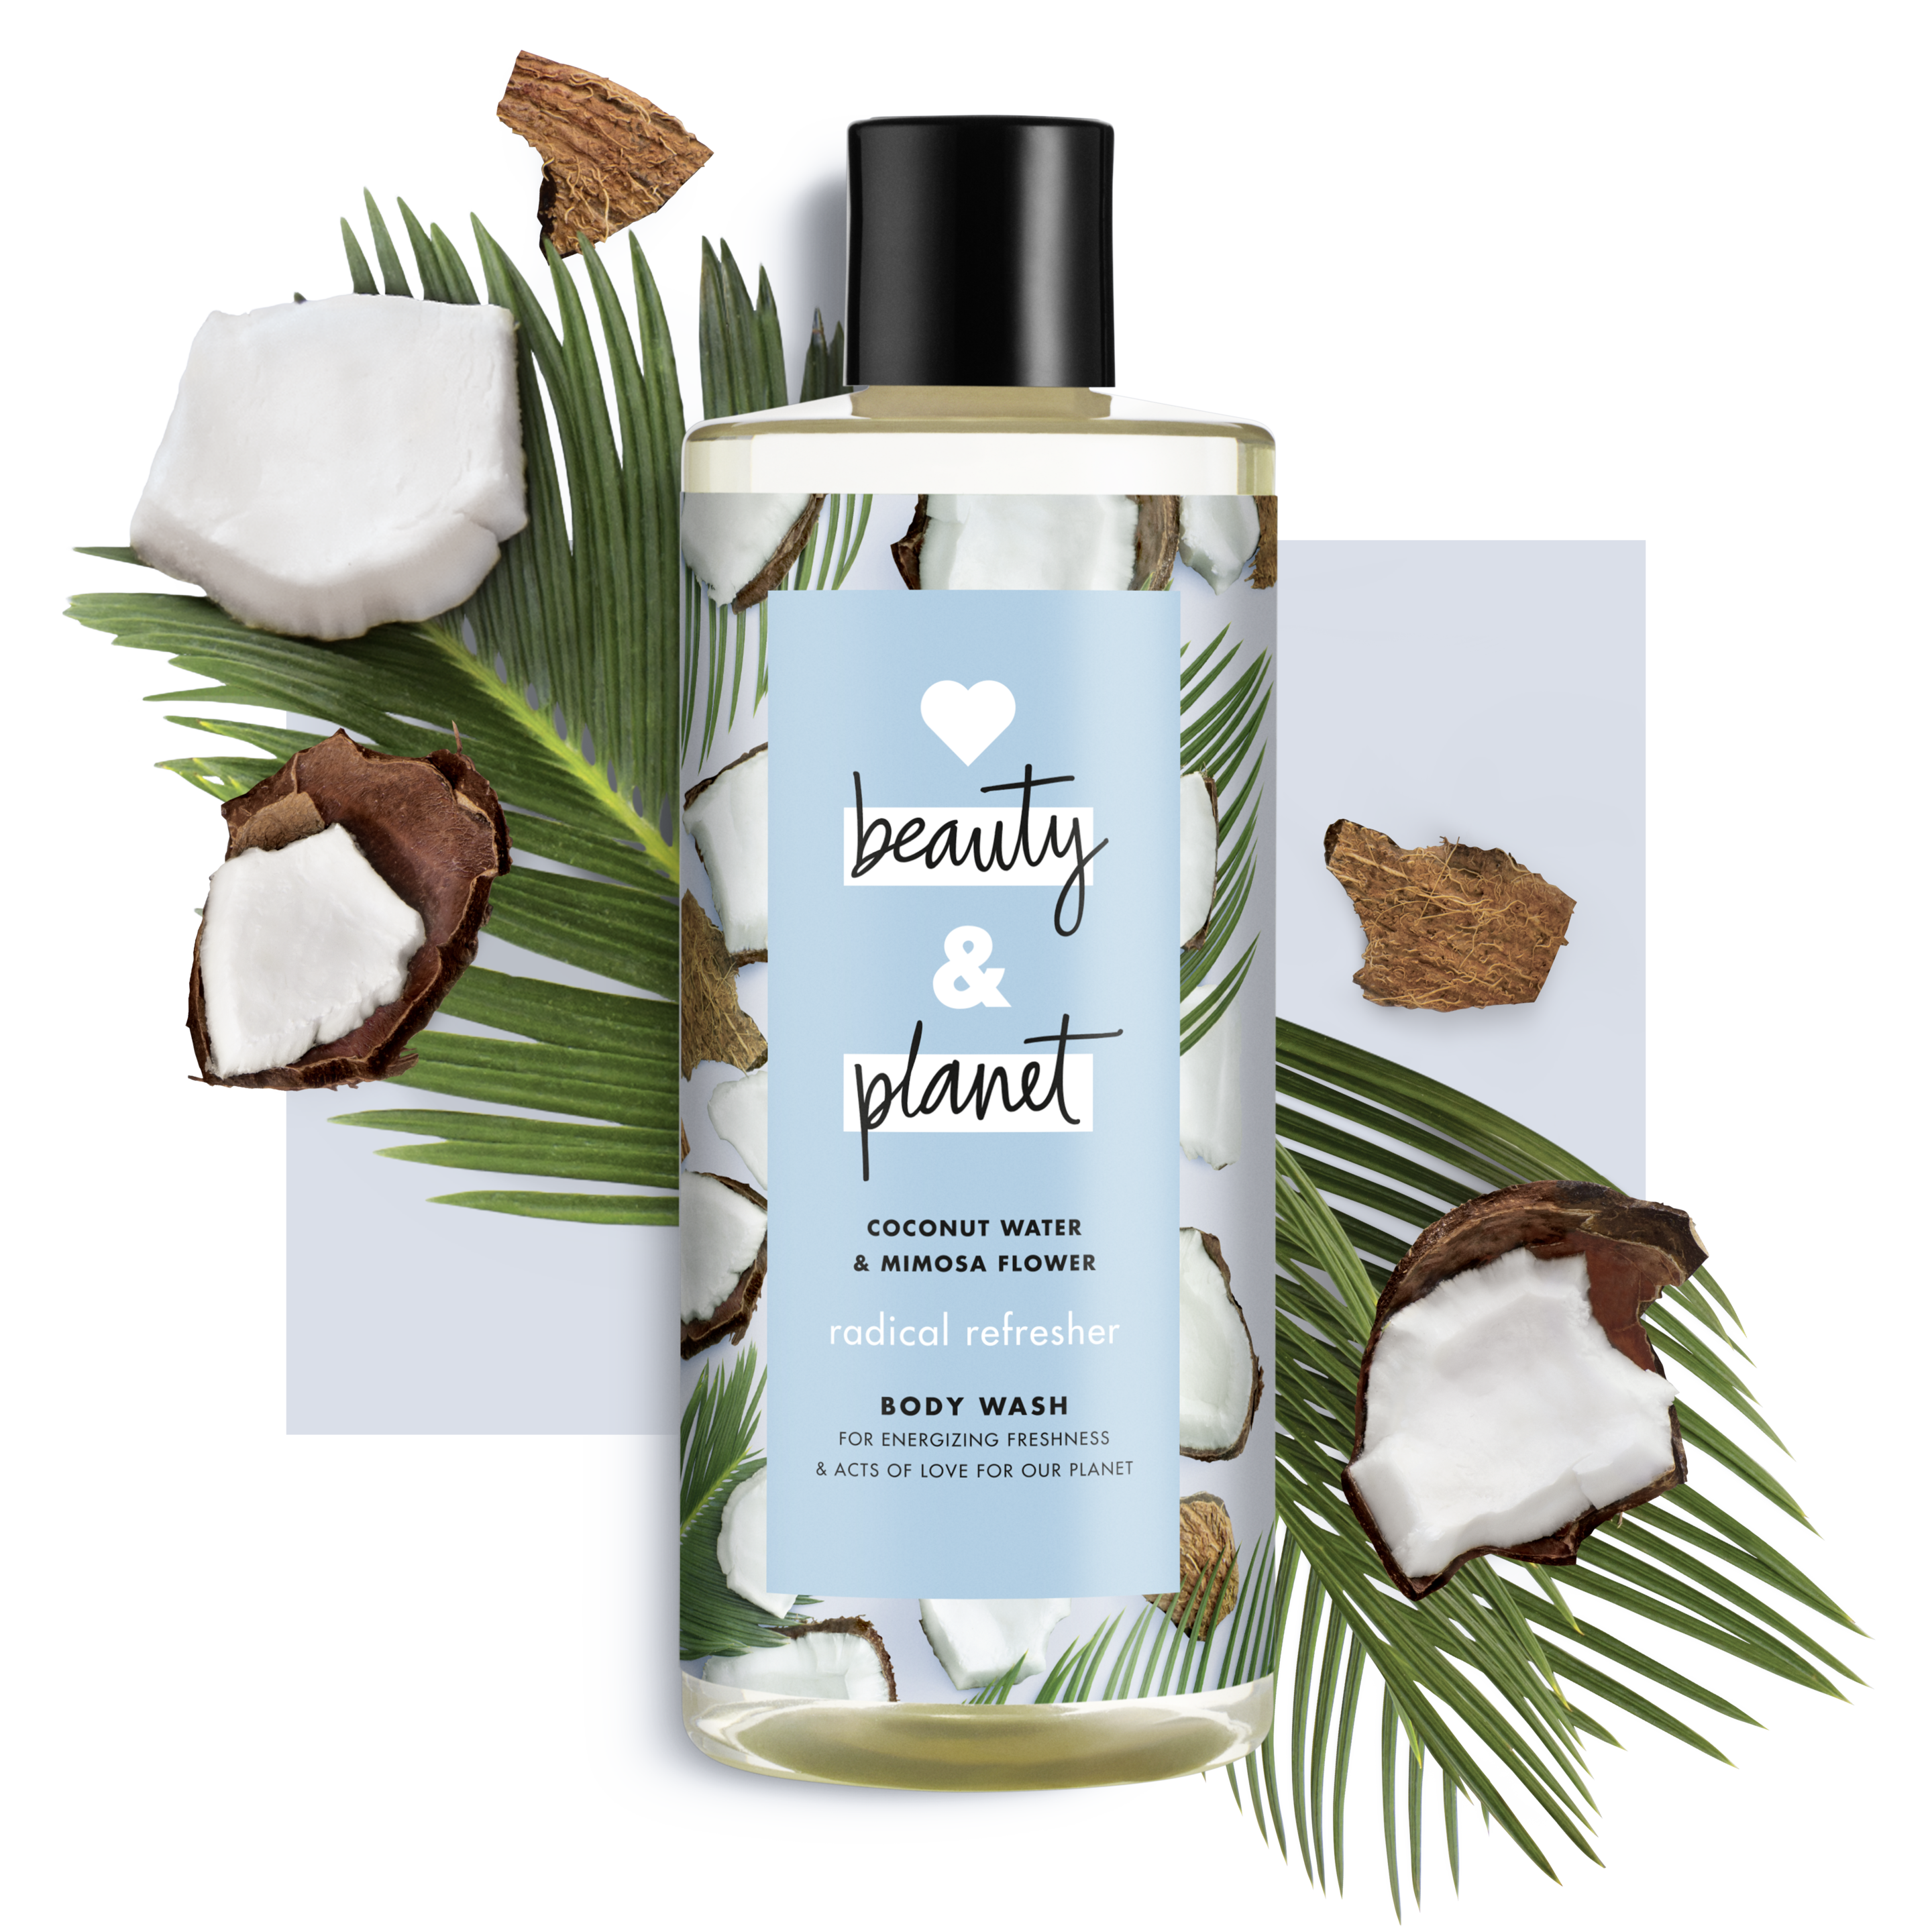 Front of body wash pack Coconut Water & Mimosa Flower body wash Radical Refresher 500ml Text